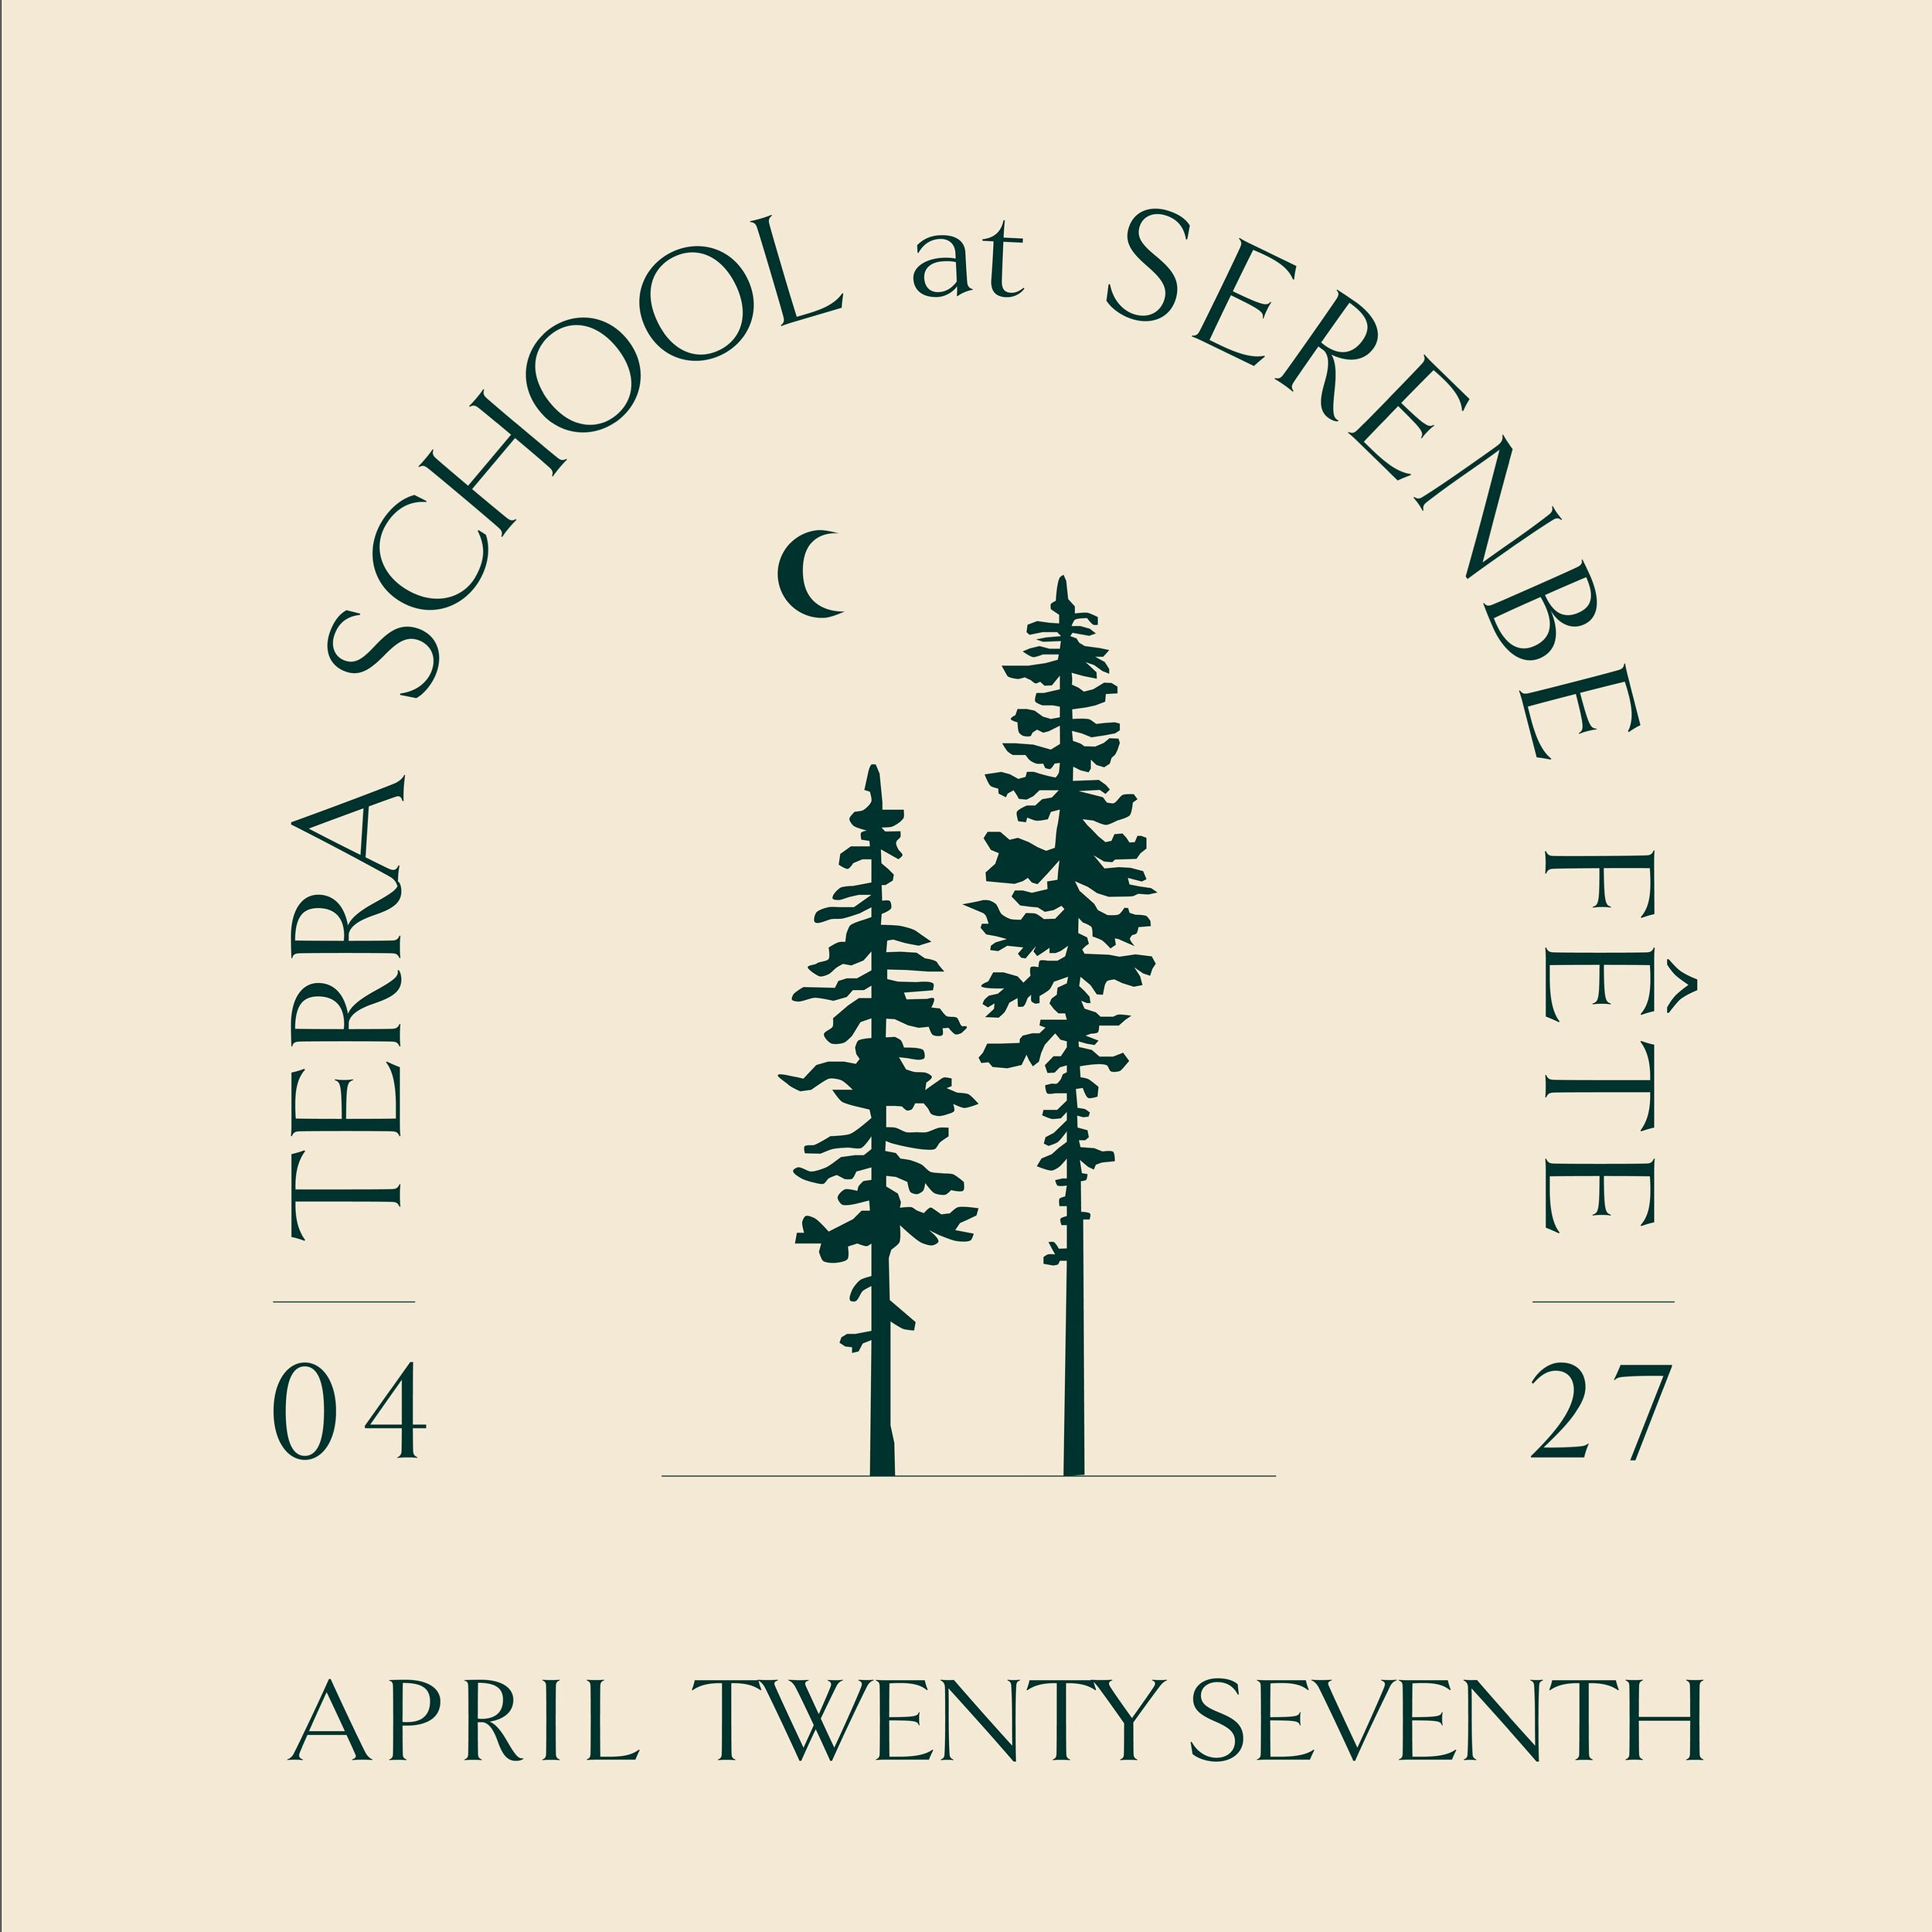 We are thrilled to announce tickets for the @terraatserenbe Inaugural Fete are on sale now! We look forward to you joining us for an exciting evening to celebrate with our community and raise critical funds to support our school. This festive event w